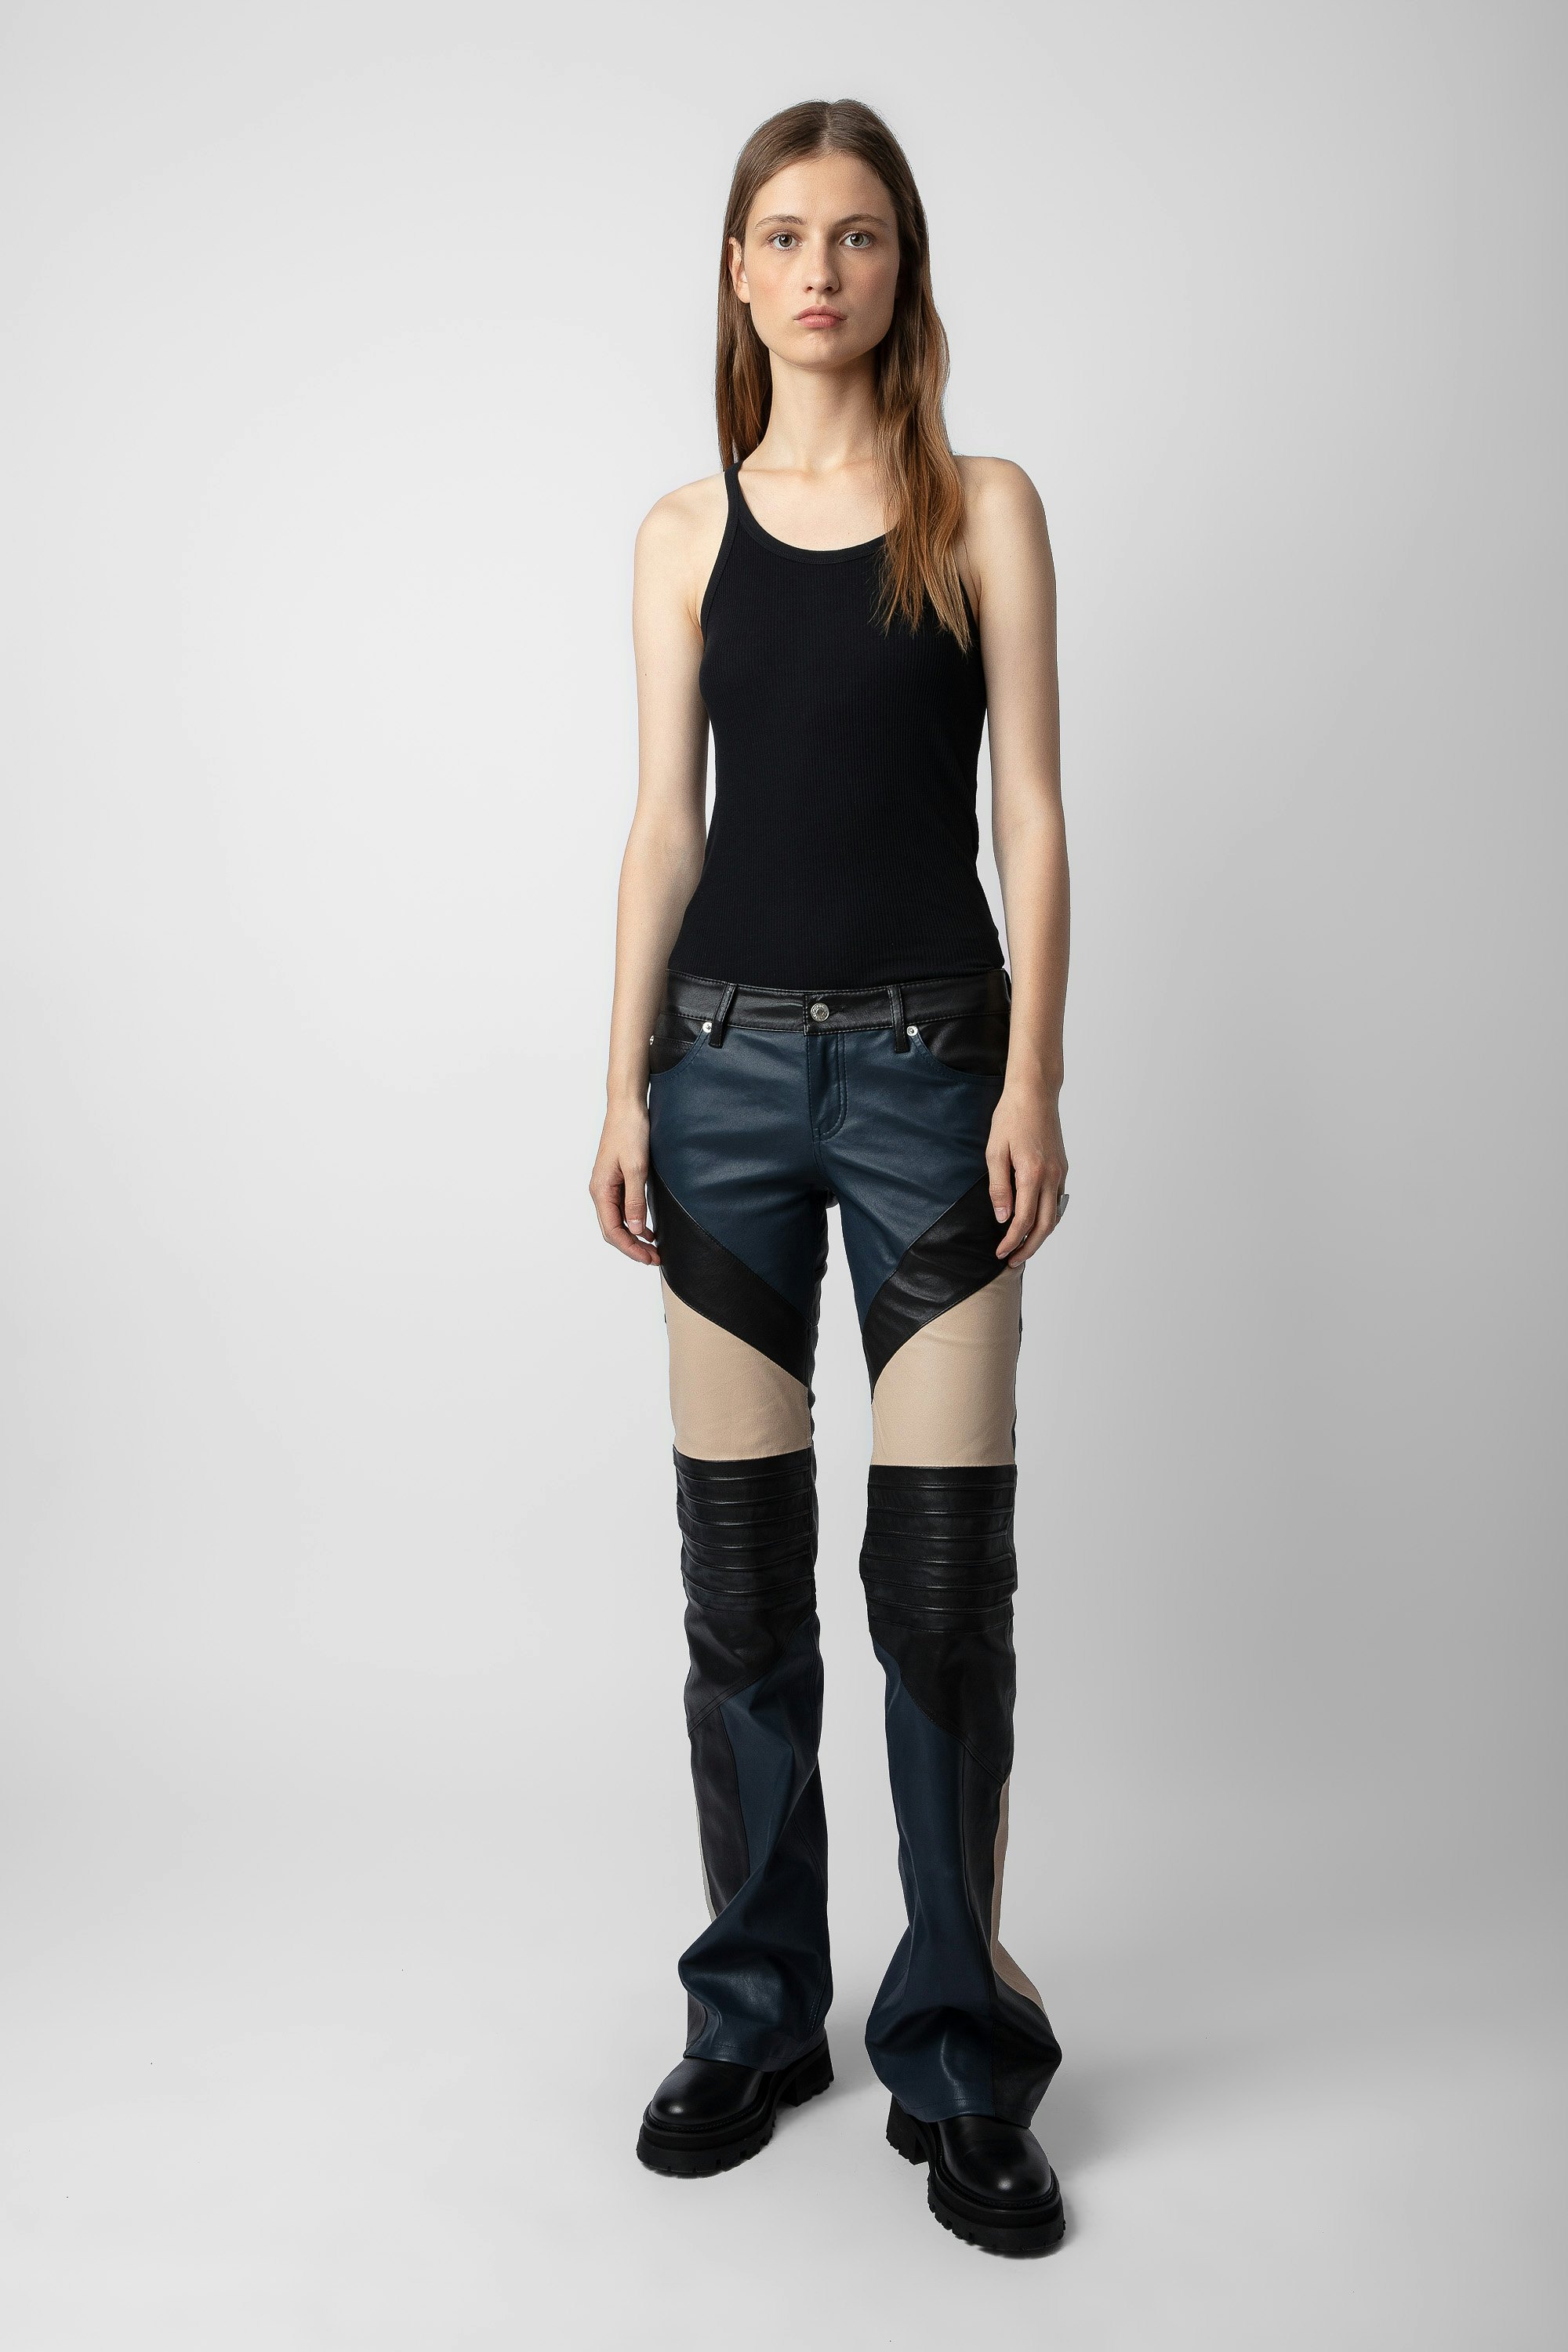 Paulin Leather Pants - Women’s black contrasting leather pants with overstitched details.